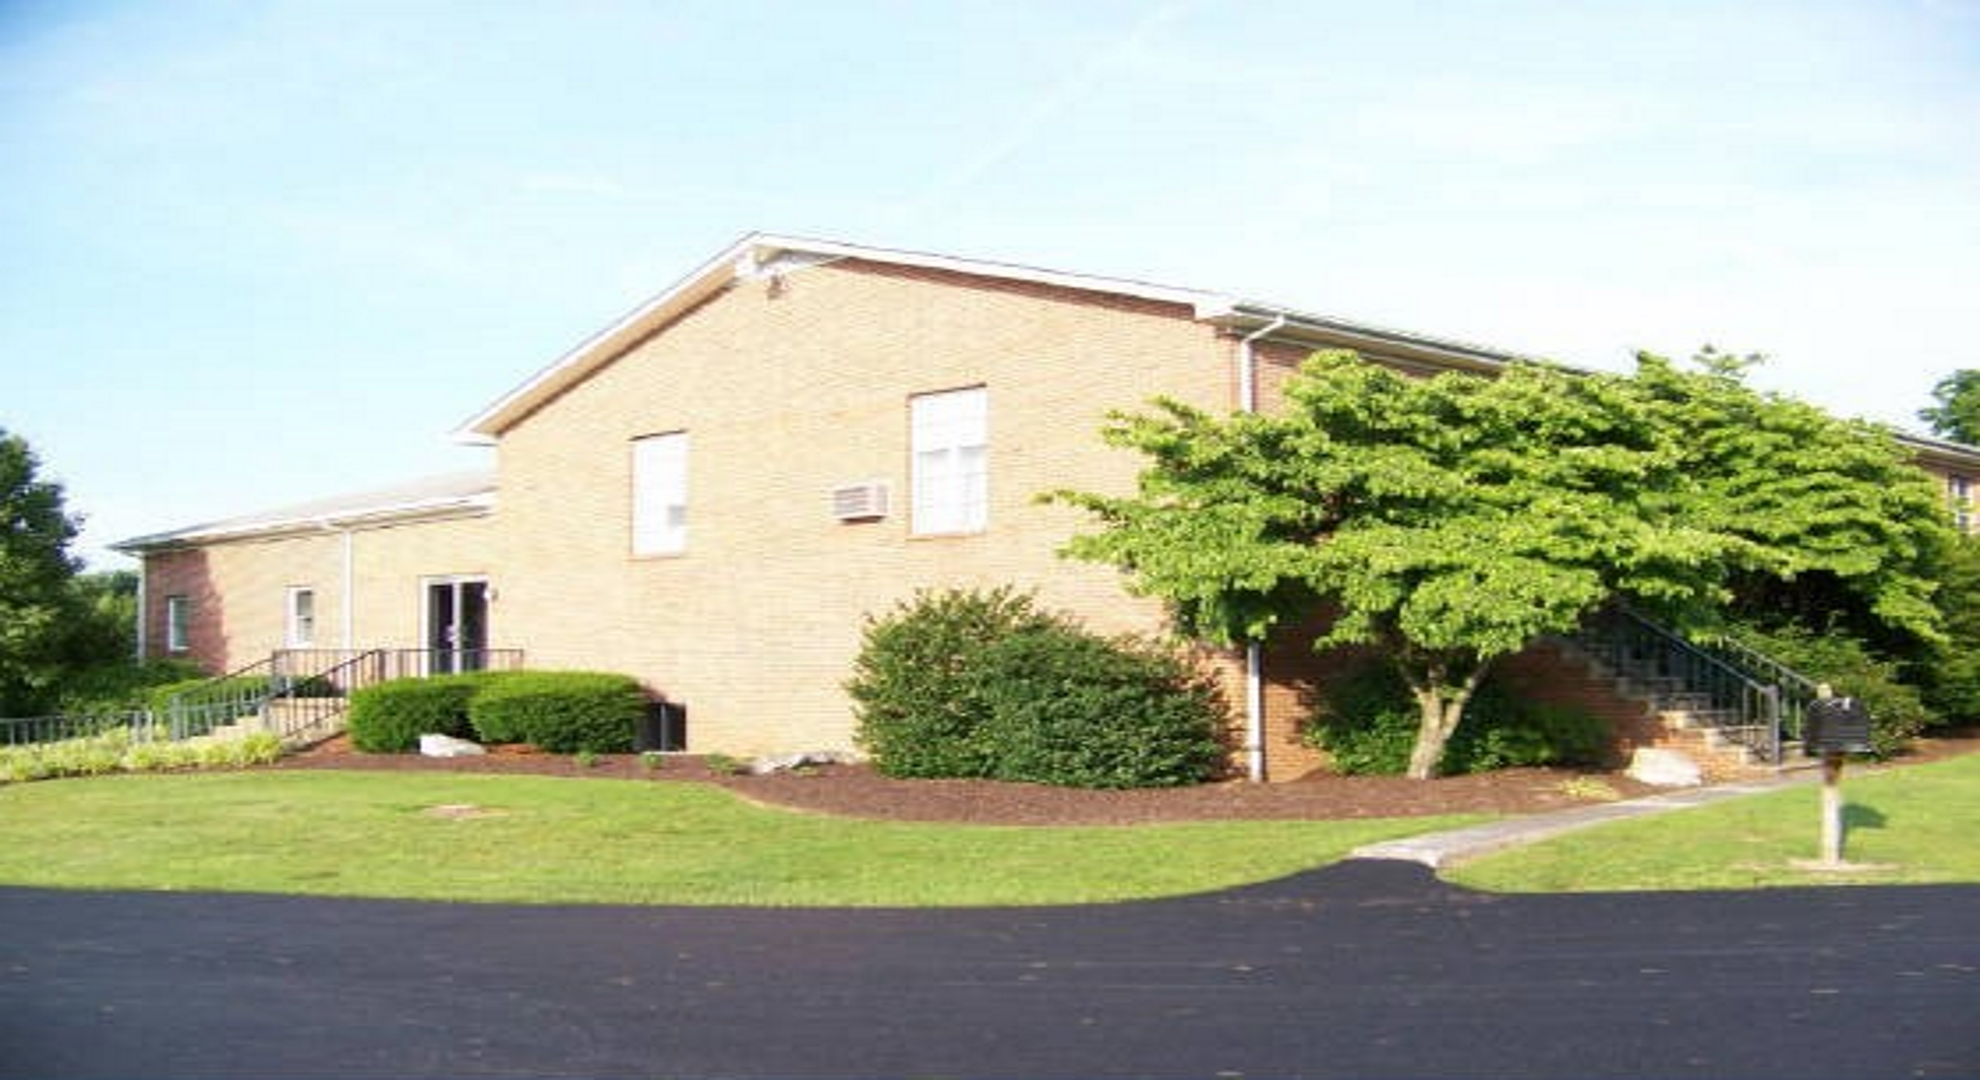 Our Church at 505 Blossom Drive